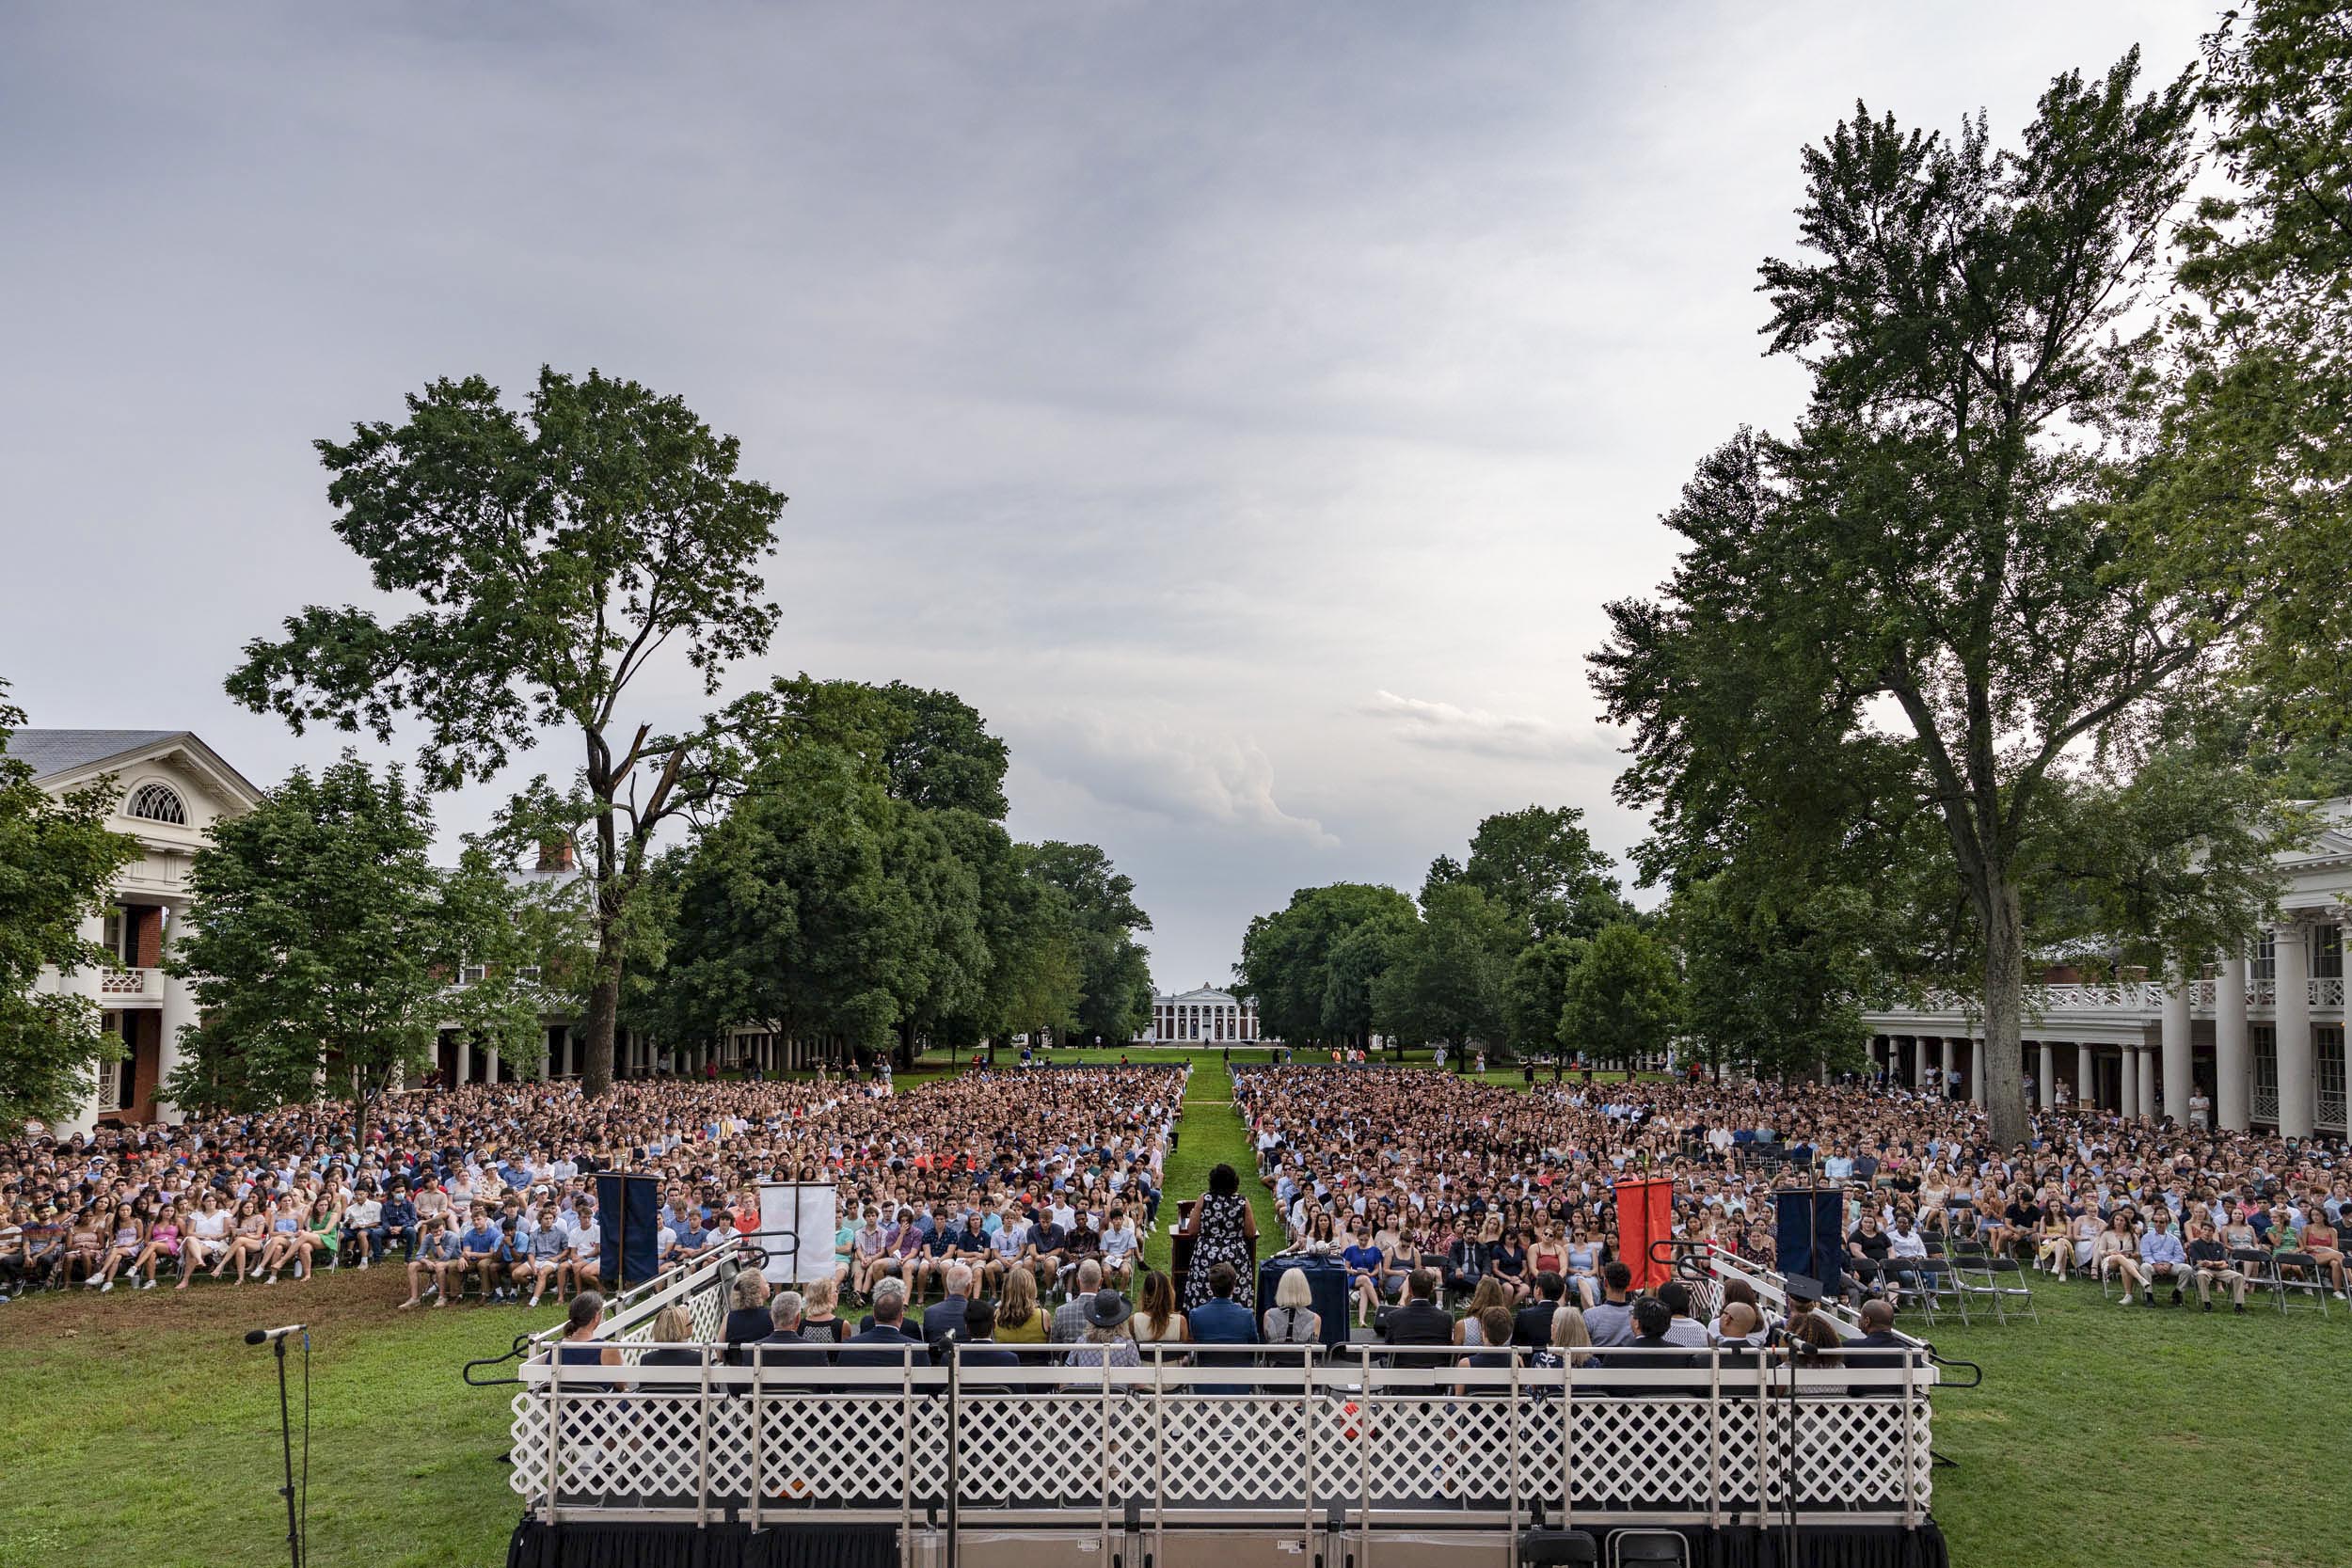 Students sitting in chairs on the lawn looking at a stage where a woman is giving a speech